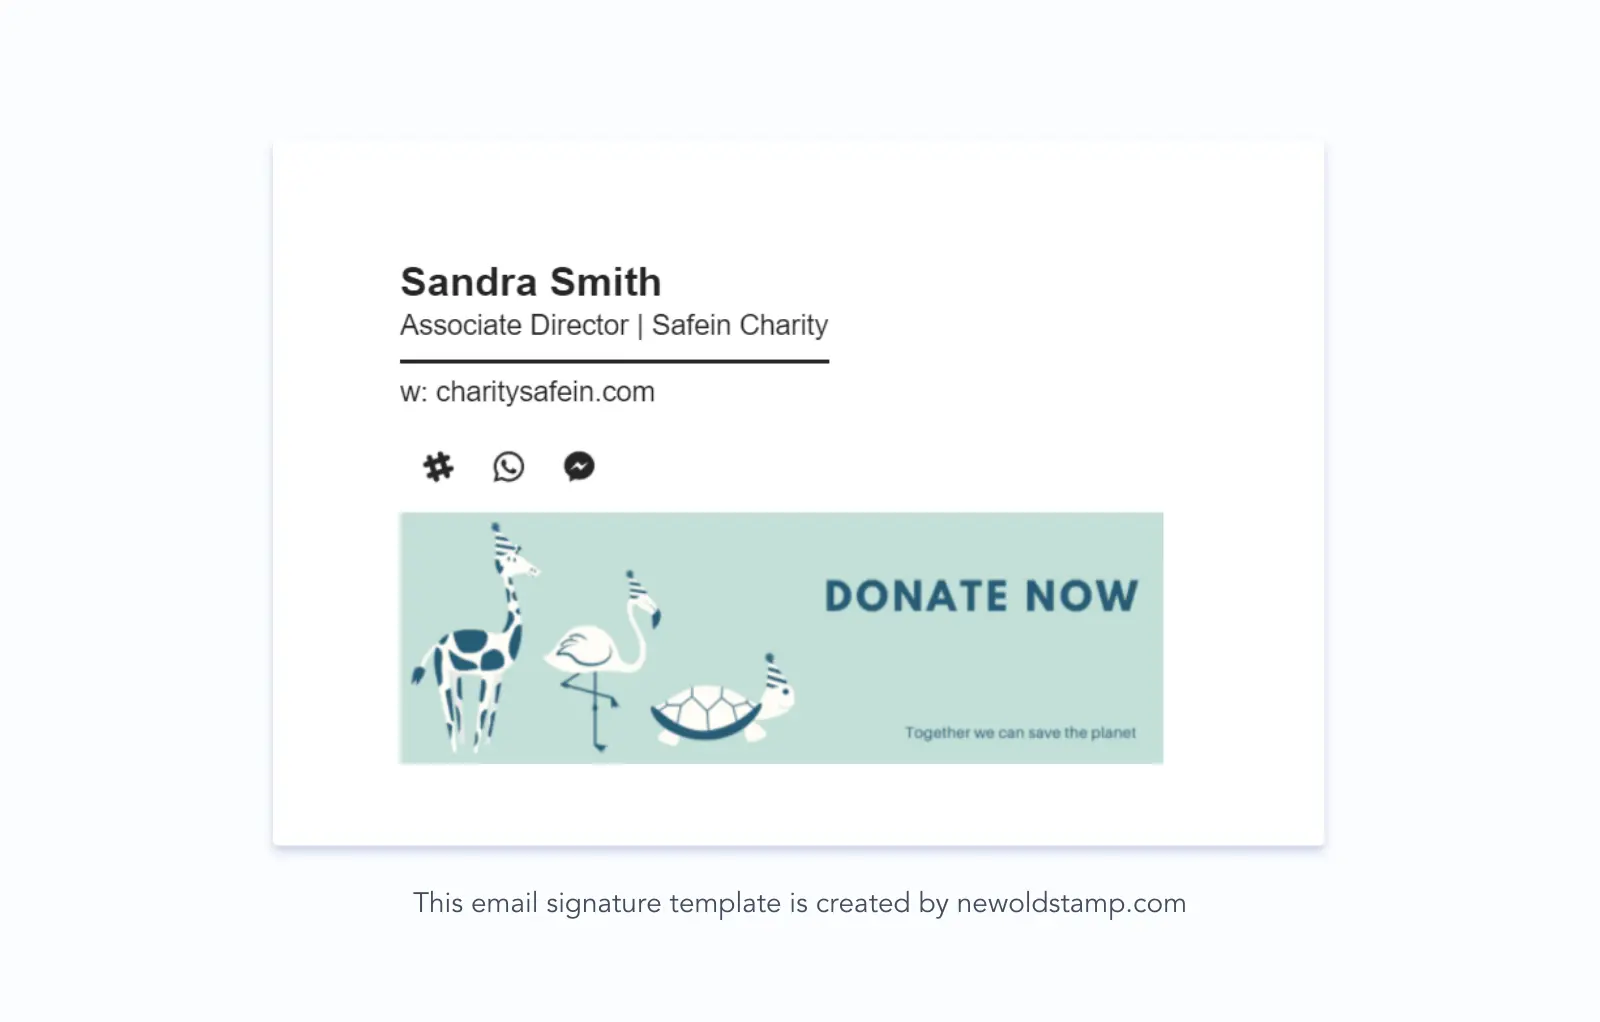 Email signature for charity created by Newoldstamp